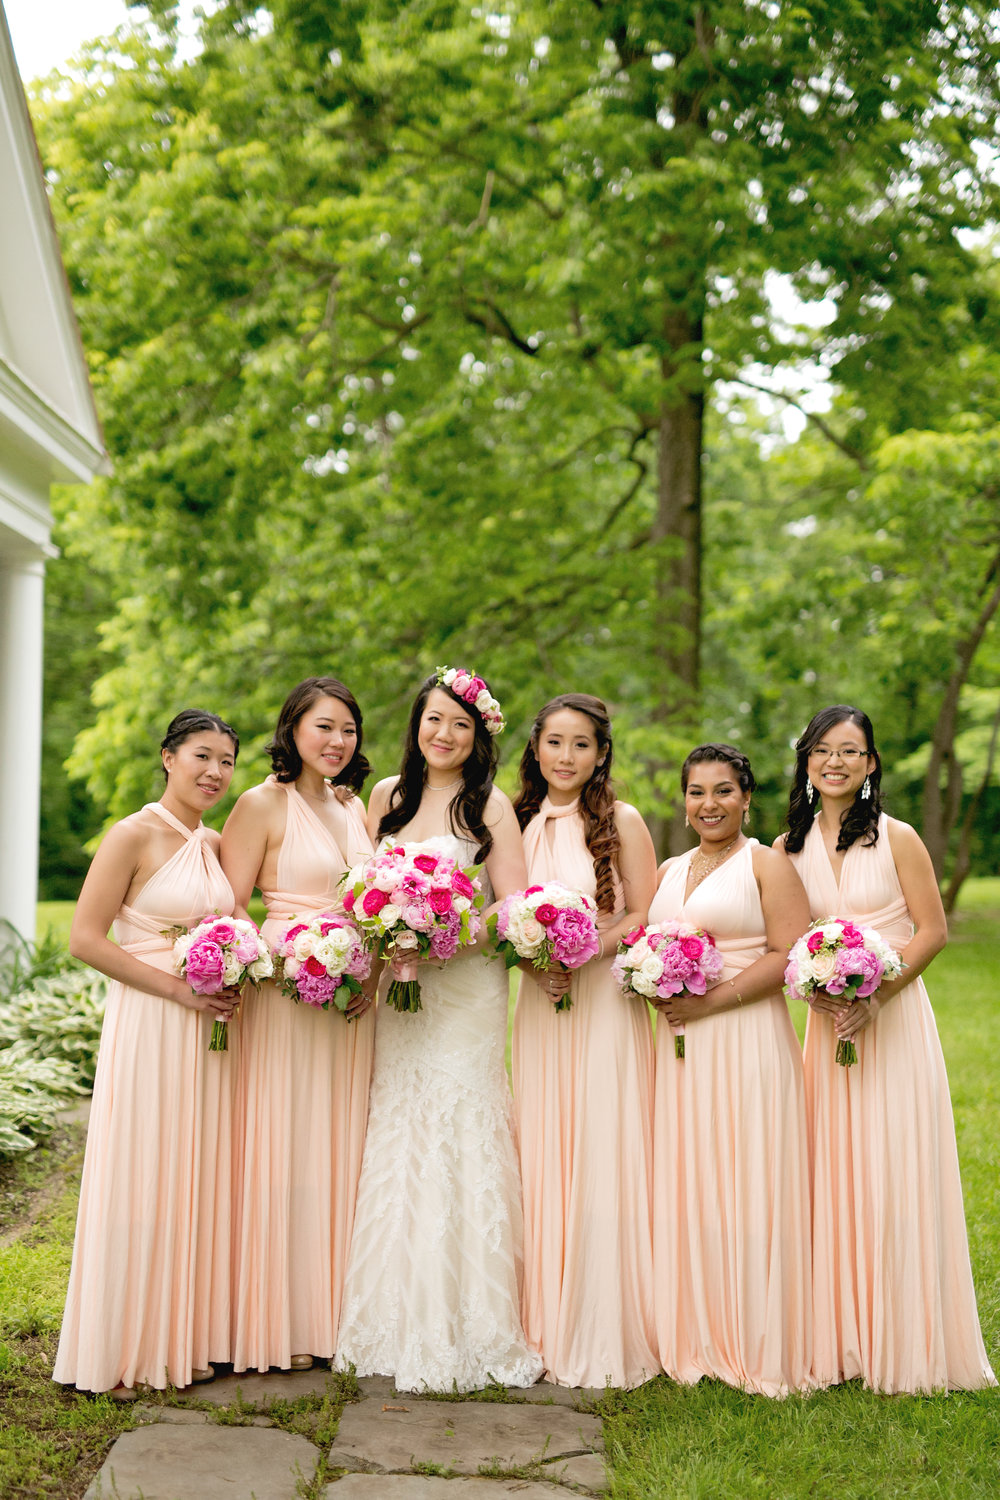 Bridesmaids with blush dresses and pink bouquets